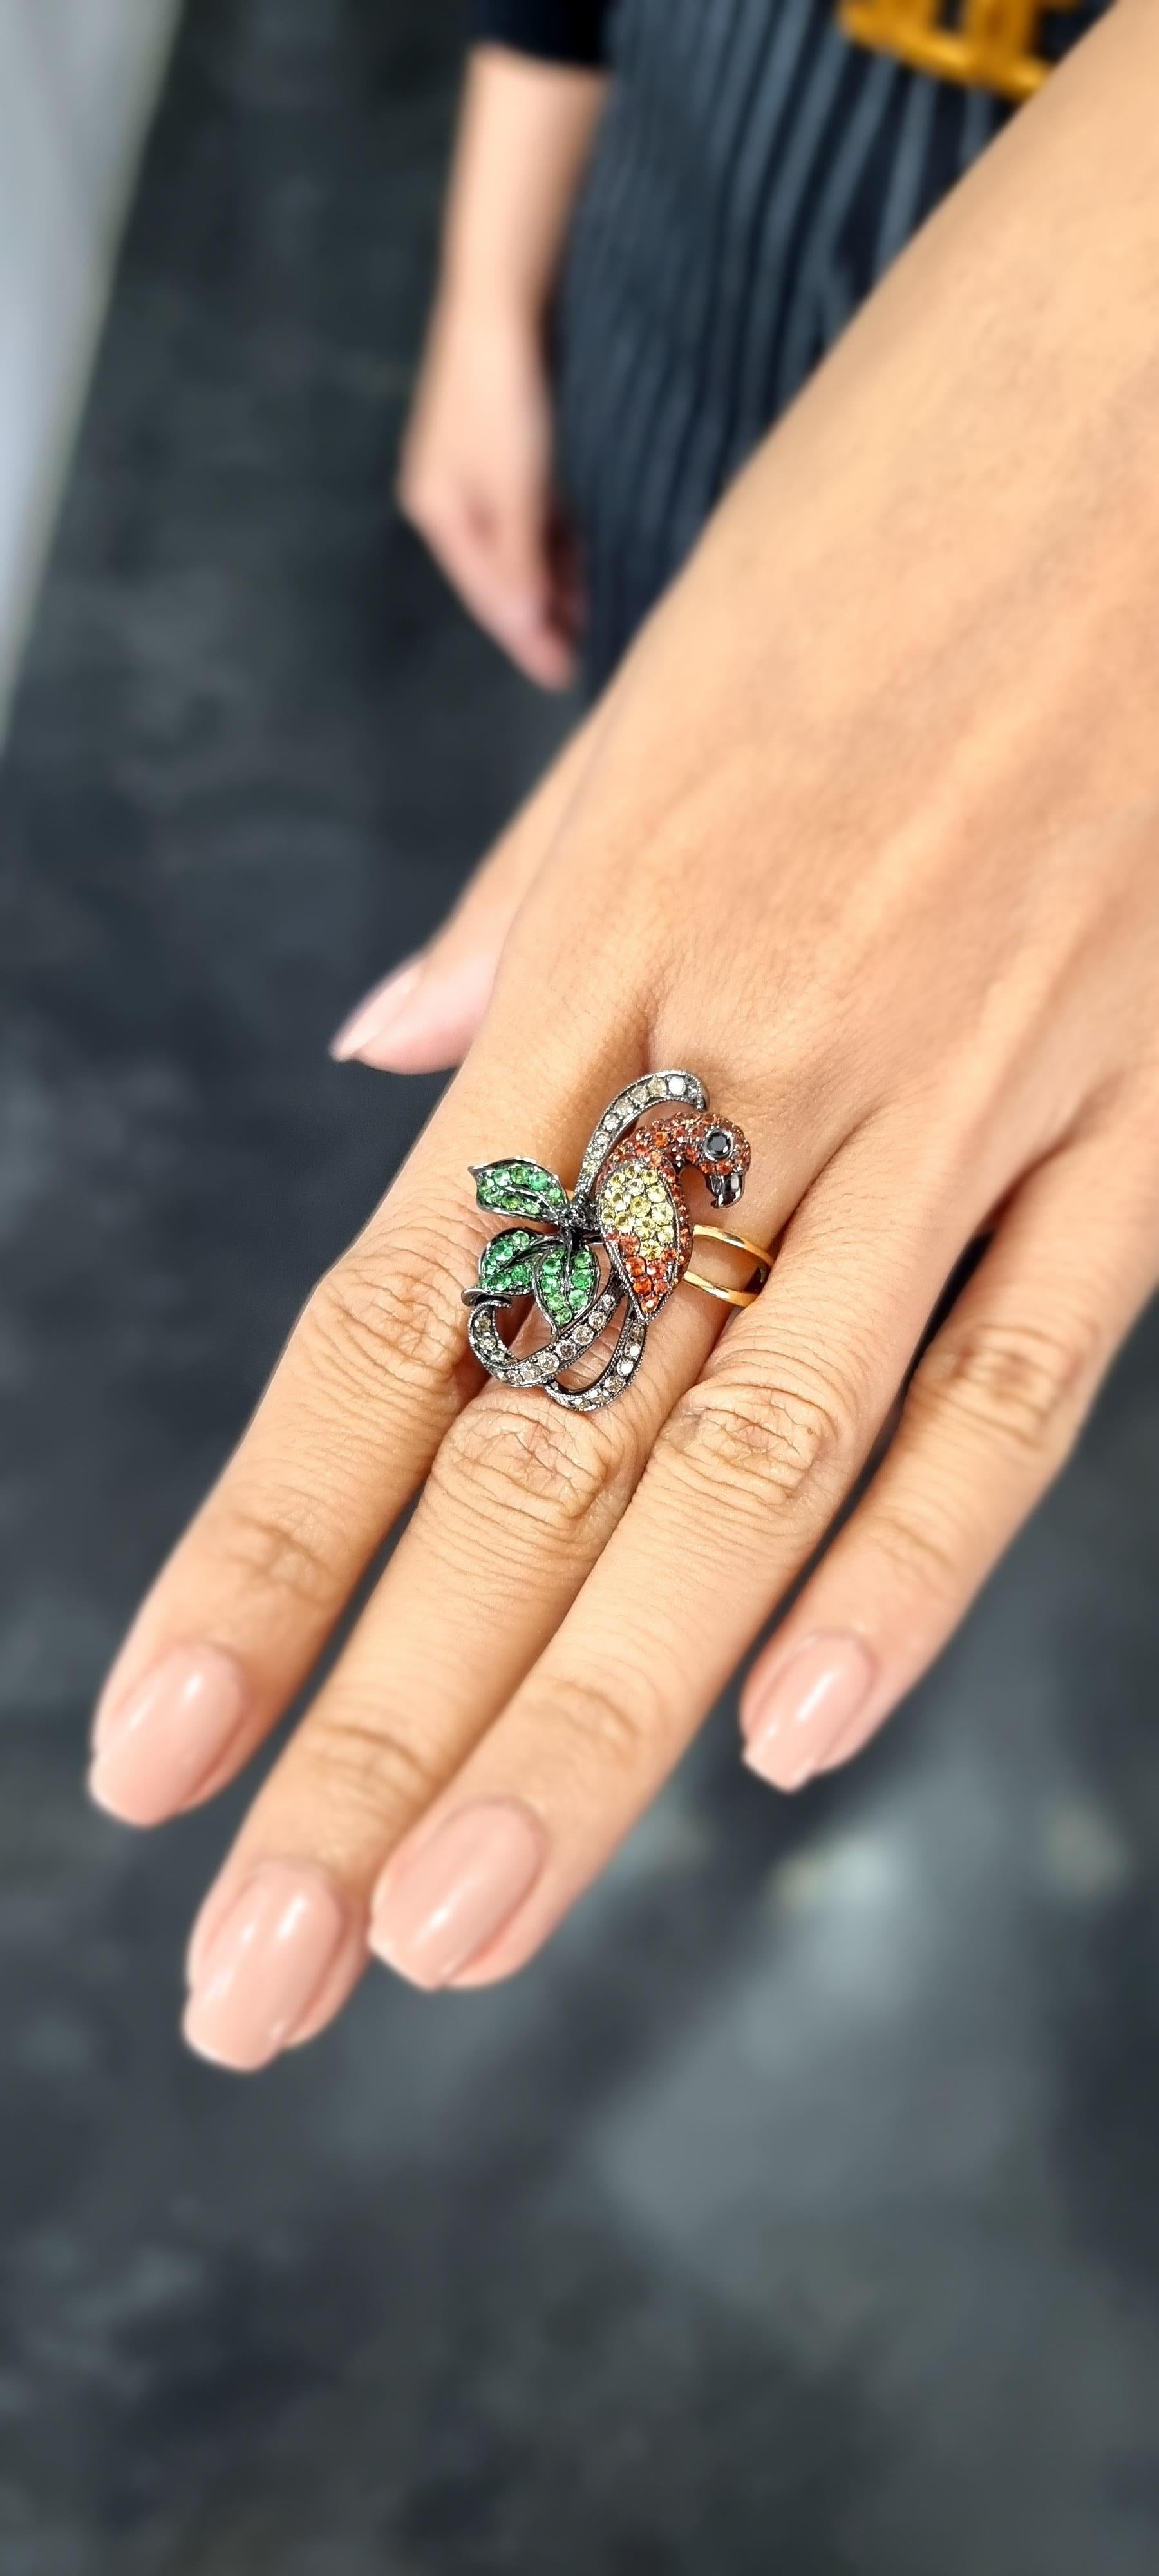 14K Gold Colourful Parrot Ring with Diamonds, Garnets and Sapphires For Sale 2